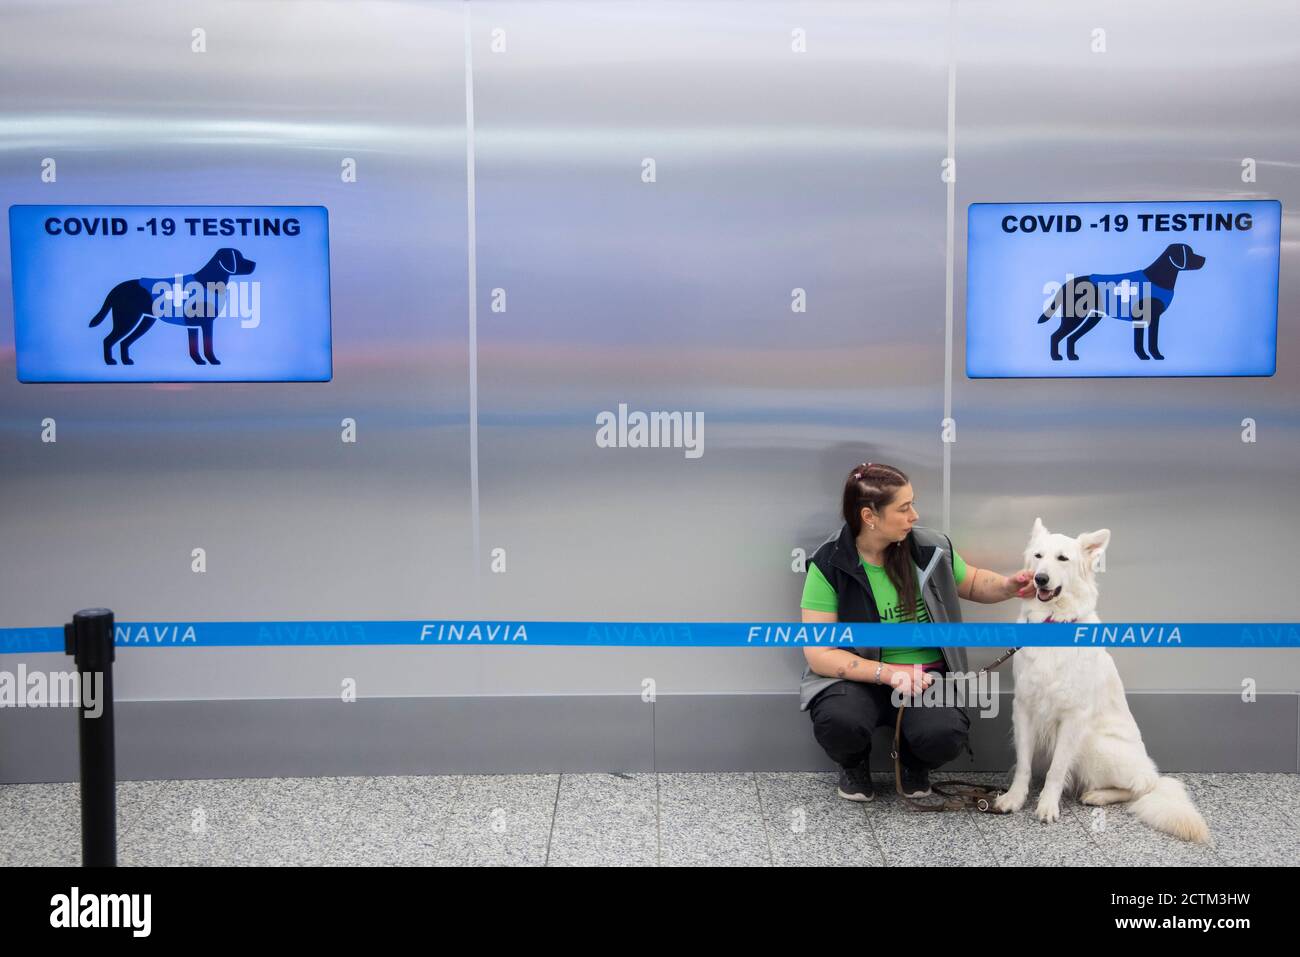 Beijing, China. 22nd Sep, 2020. Photo taken on Sept. 22, 2020 shows a COVID-19 sniffer dog at a press conference held at Helsinki Vantaa International Airport in Finland. Four specially trained dogs demonstrated their ability to sniff COVID-19 in people even before showing symptoms during a press conference held at Helsinki Vantaa International Airport on Tuesday. The pilot project is scheduled to commence later this week. Credit: Matti Matikainen/Xinhua/Alamy Live News Stock Photo